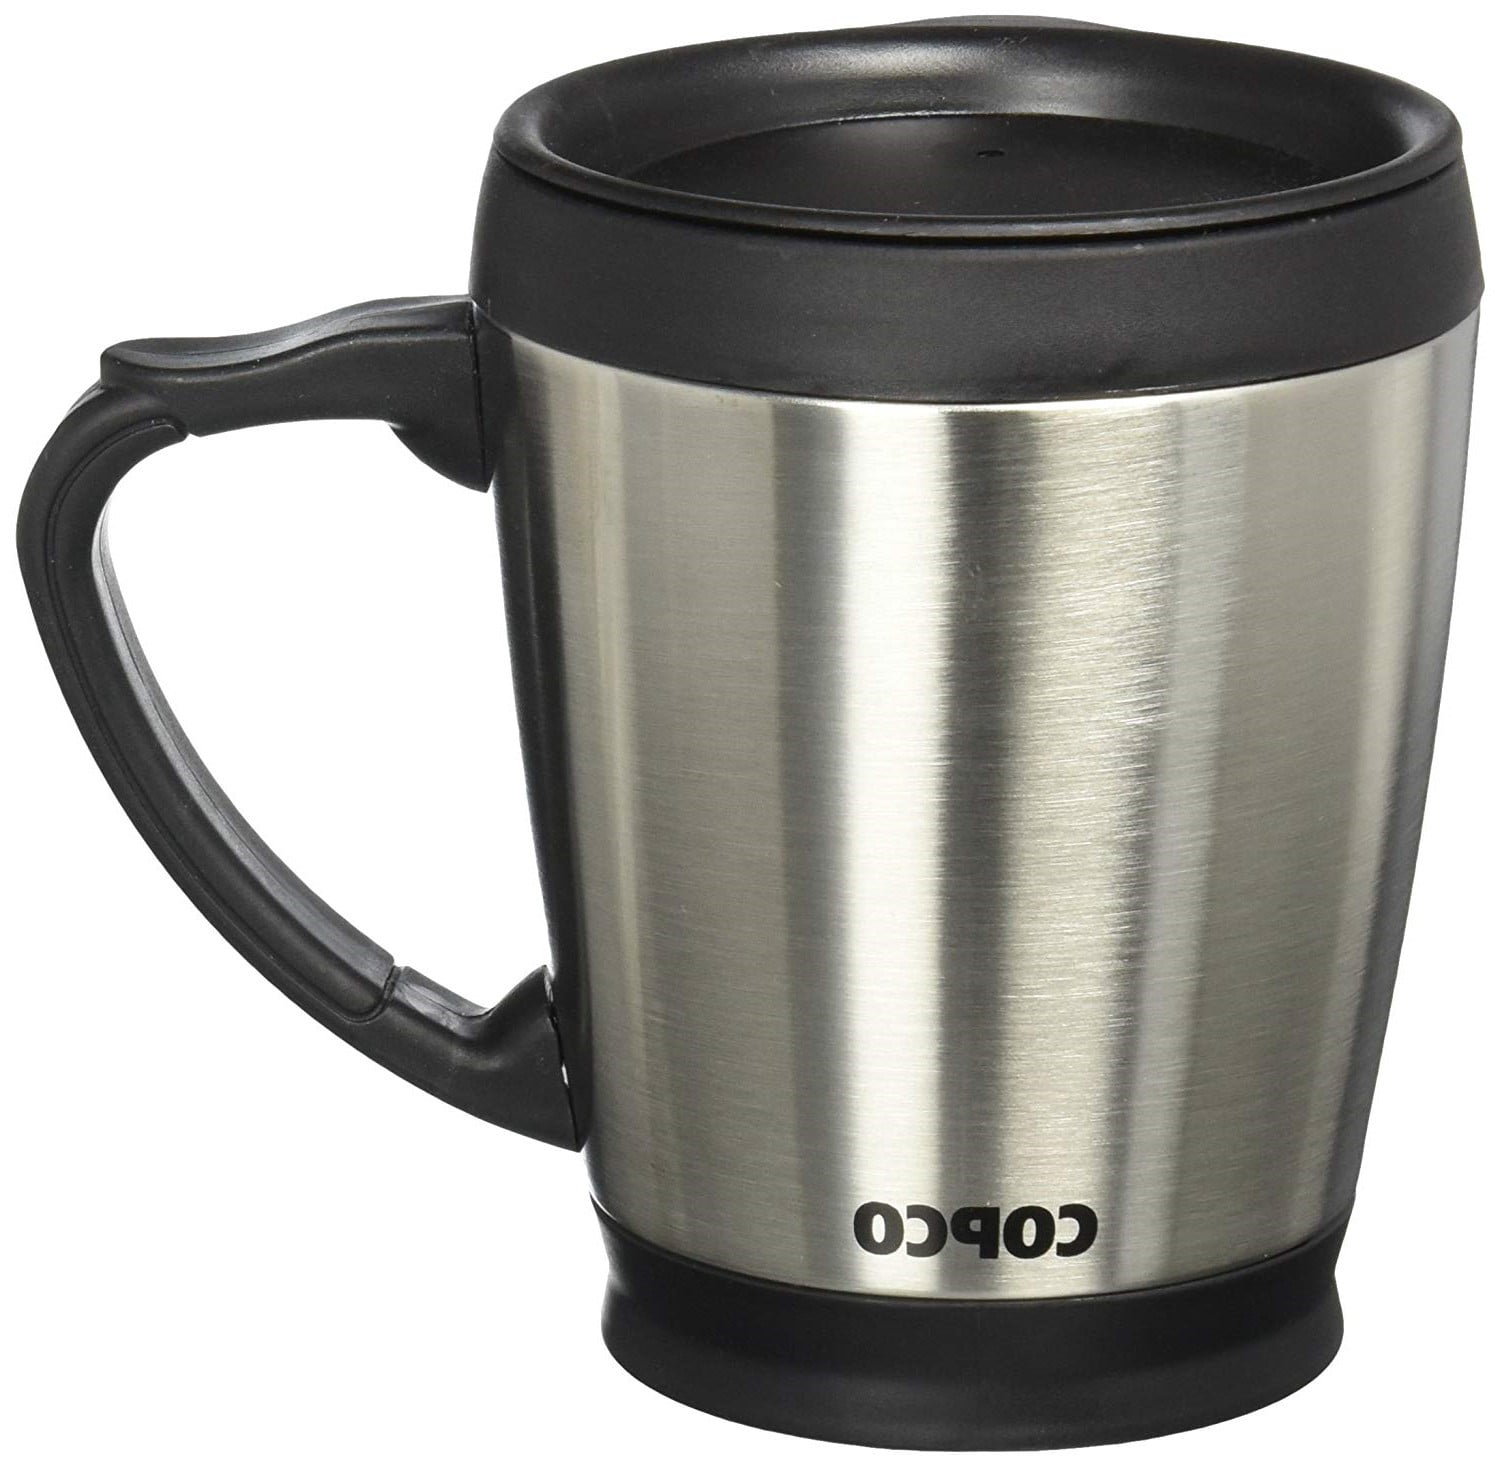 Copco Desktop 16 Ounce Stainless Steel Coffee Mug With Easy Grip Handle -  Silver w/ Black Lid & Base 2510-7313